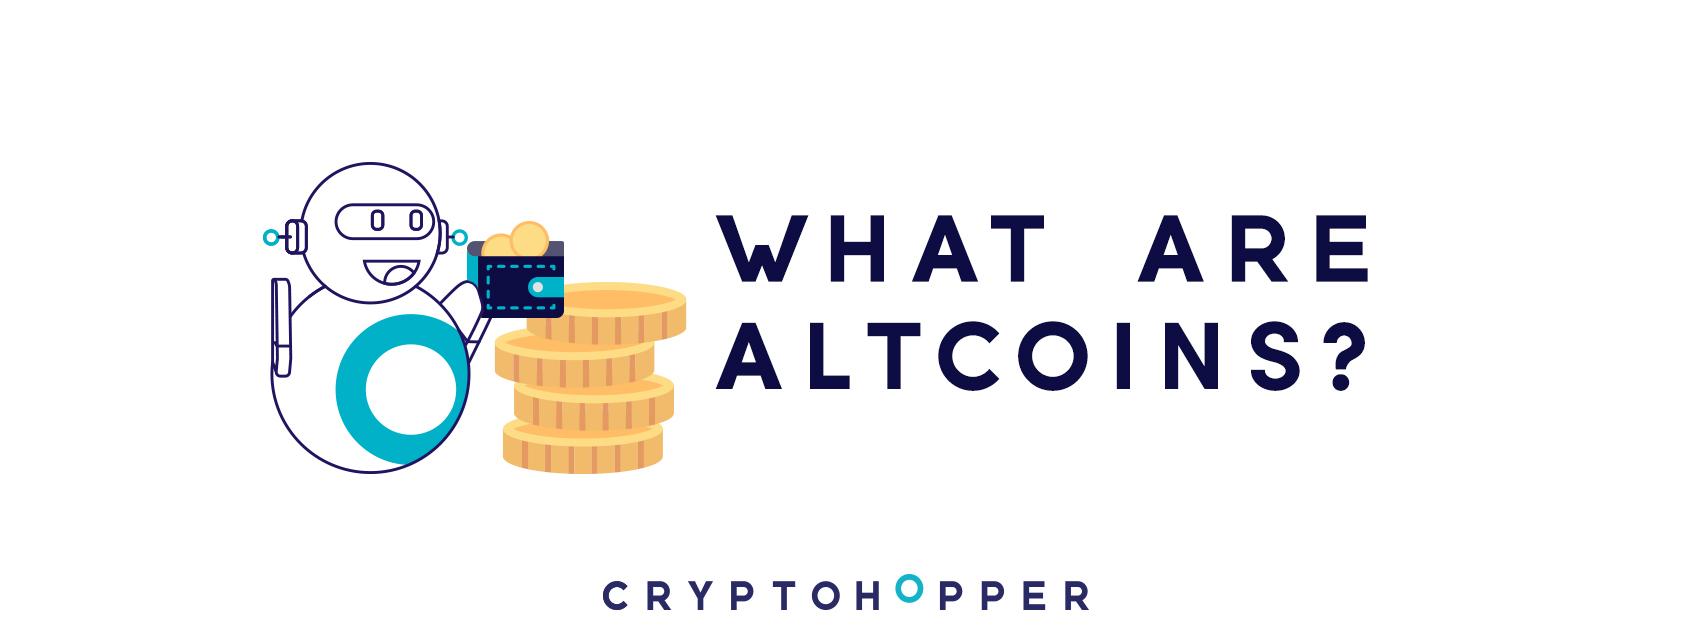 What Are Altcoins?